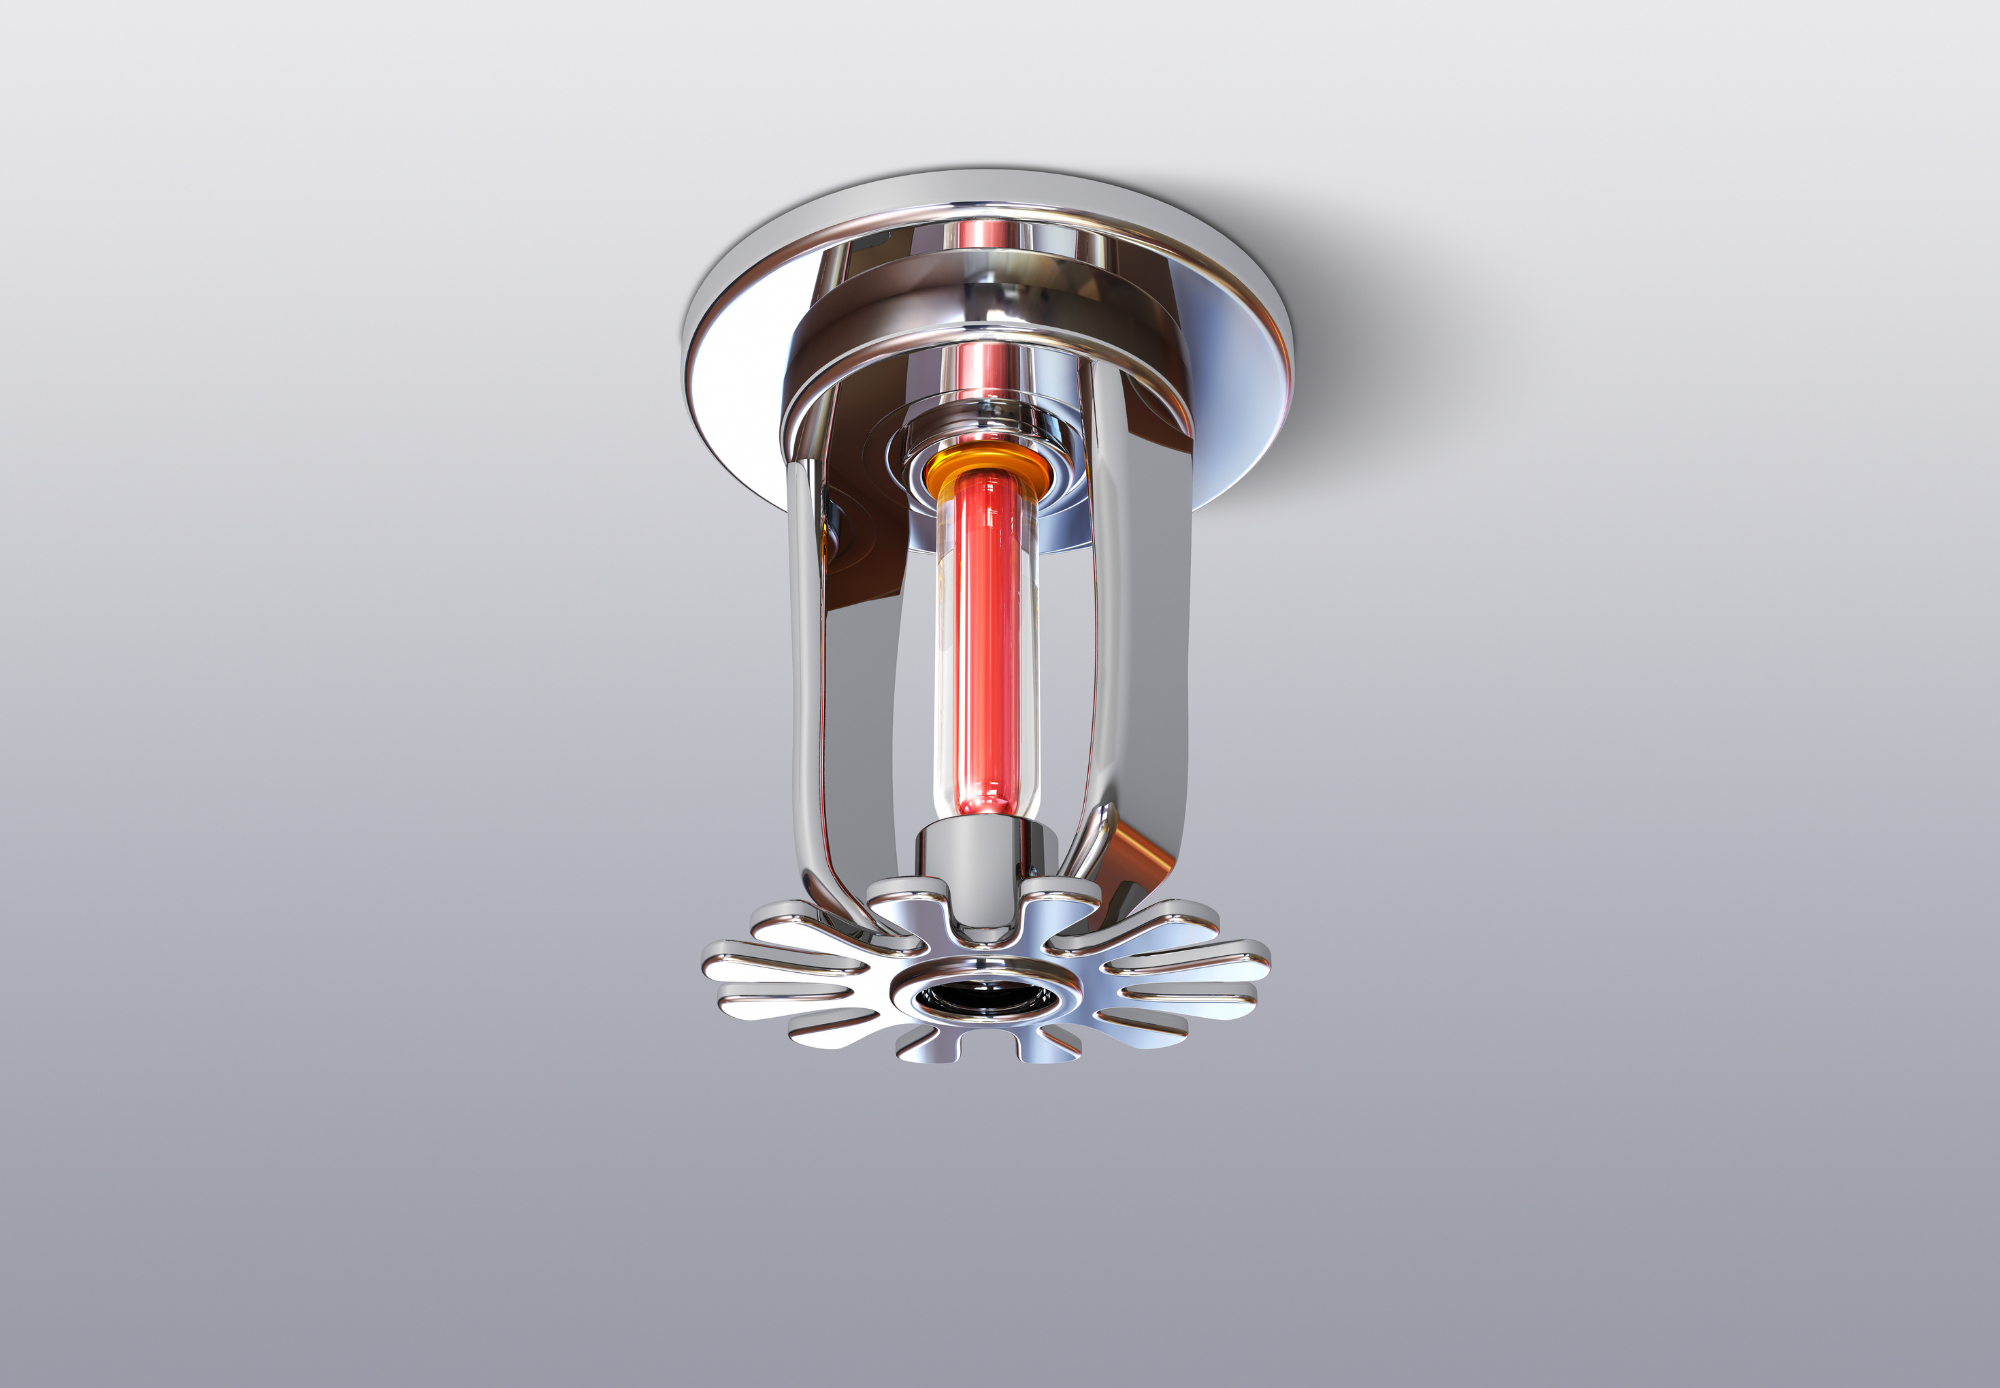 Fire suppression systems 210 x 145.7mm